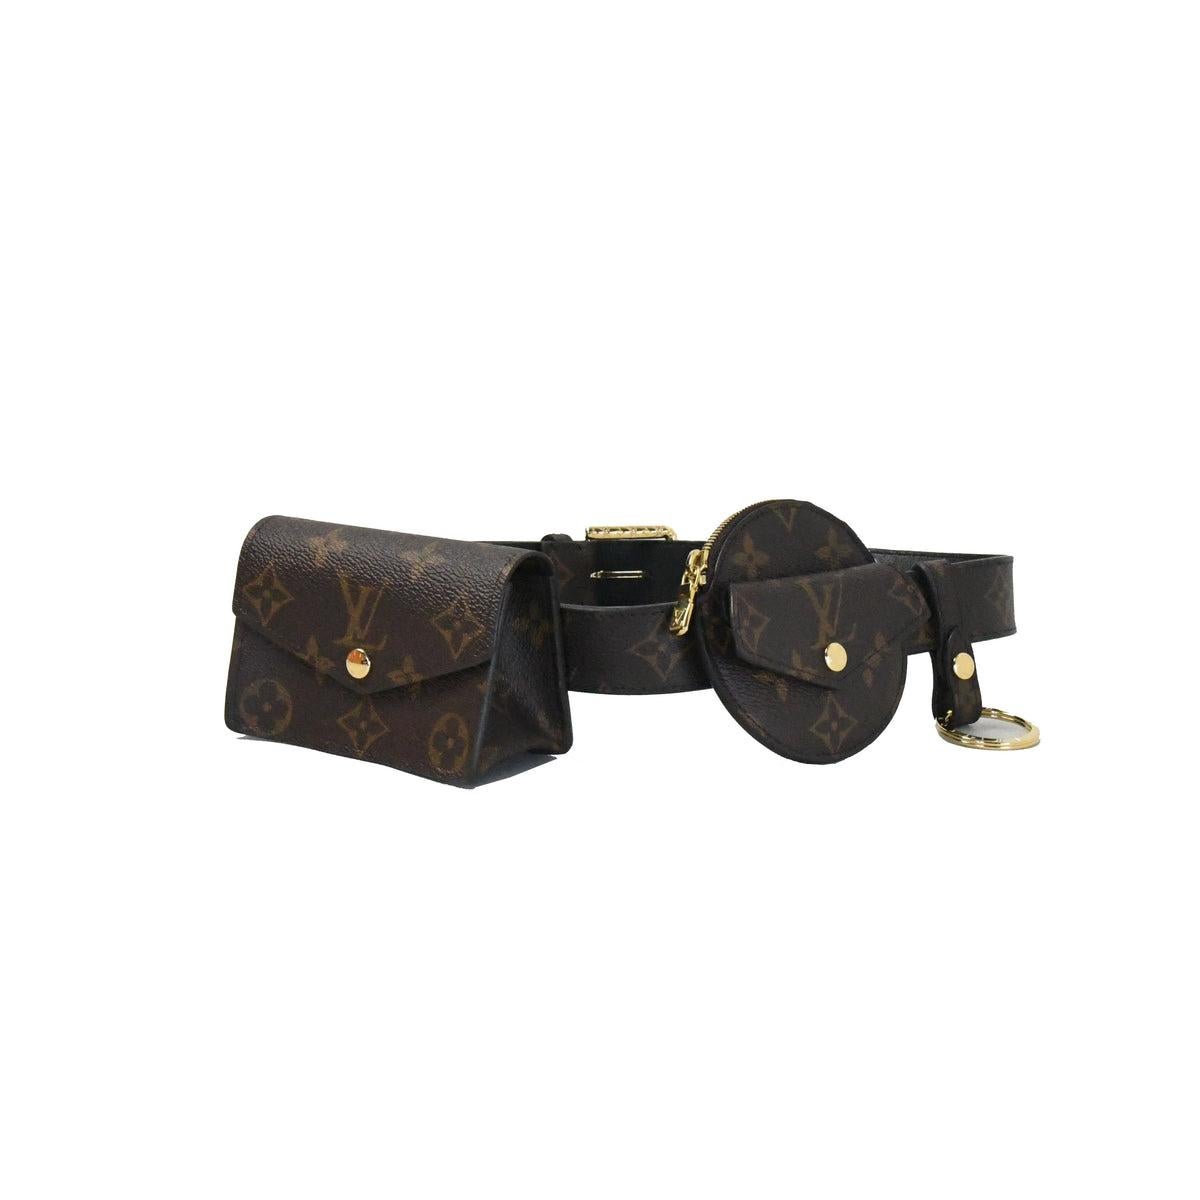 Louis Vuitton Daily Multi Pocket 30 MM Belt Bag Brown 80

All items are 100% Authentic.
Condition: Brand New, Never Worn.